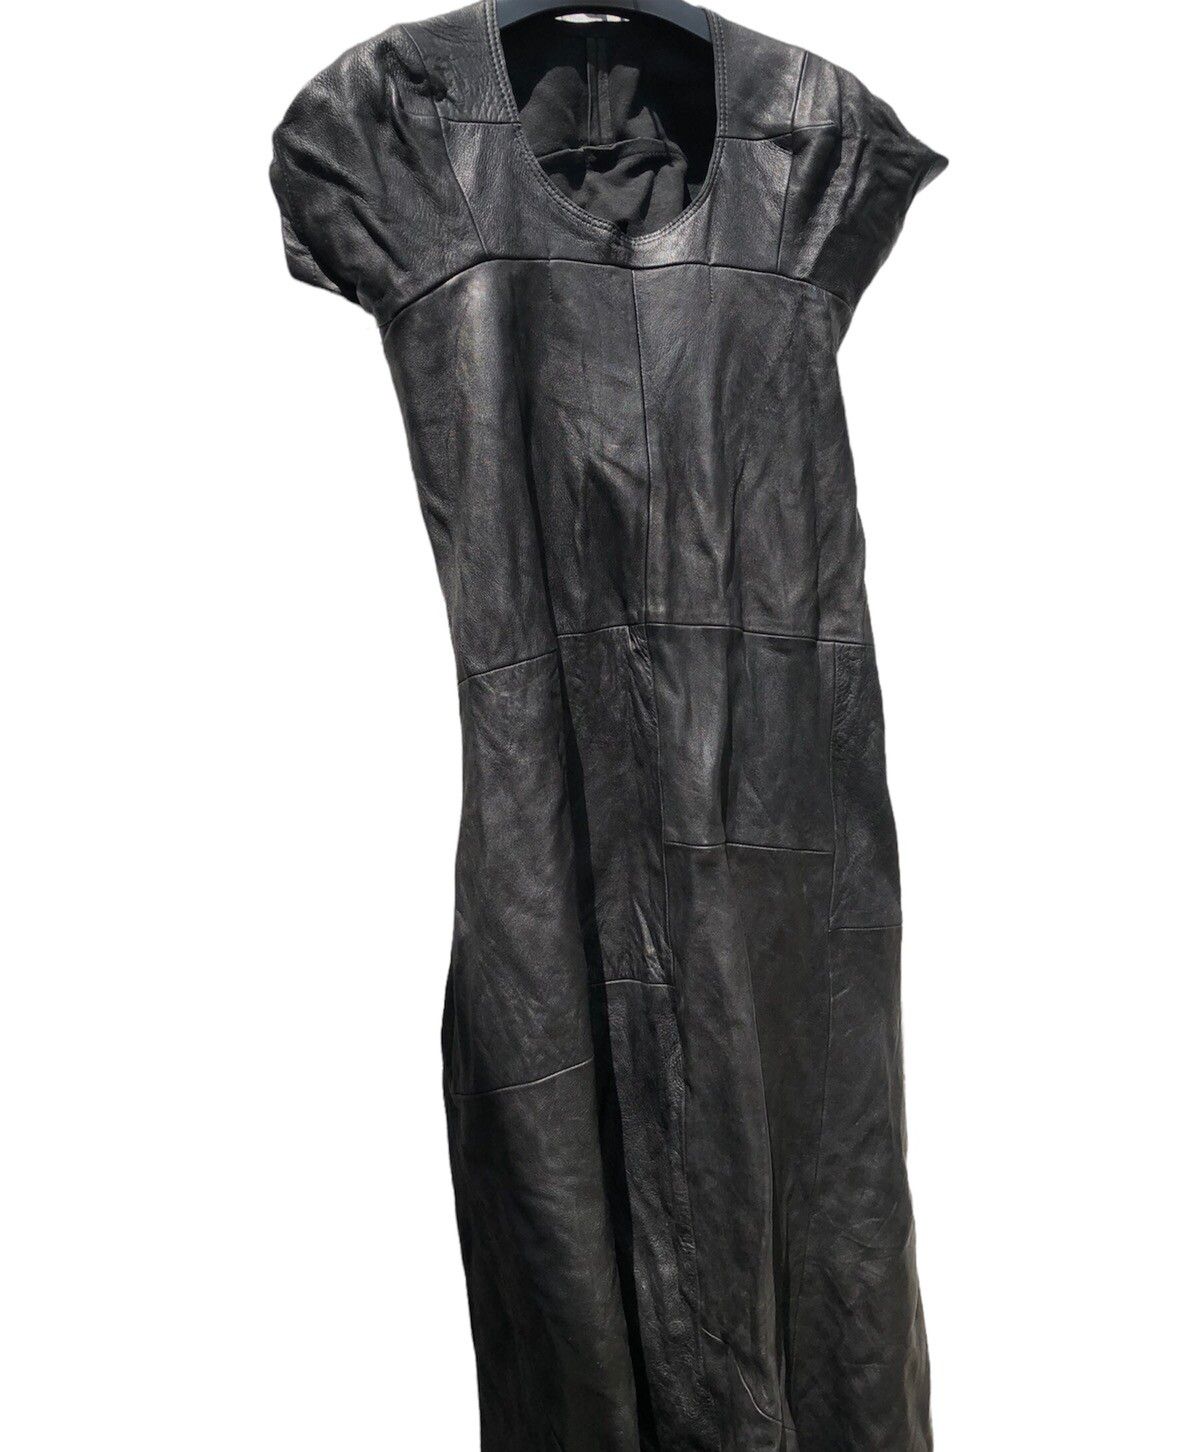 ARCHIVED JUNYA WATANABE AD 1996 PATCH MUTTON LEATHER DRESS - 6